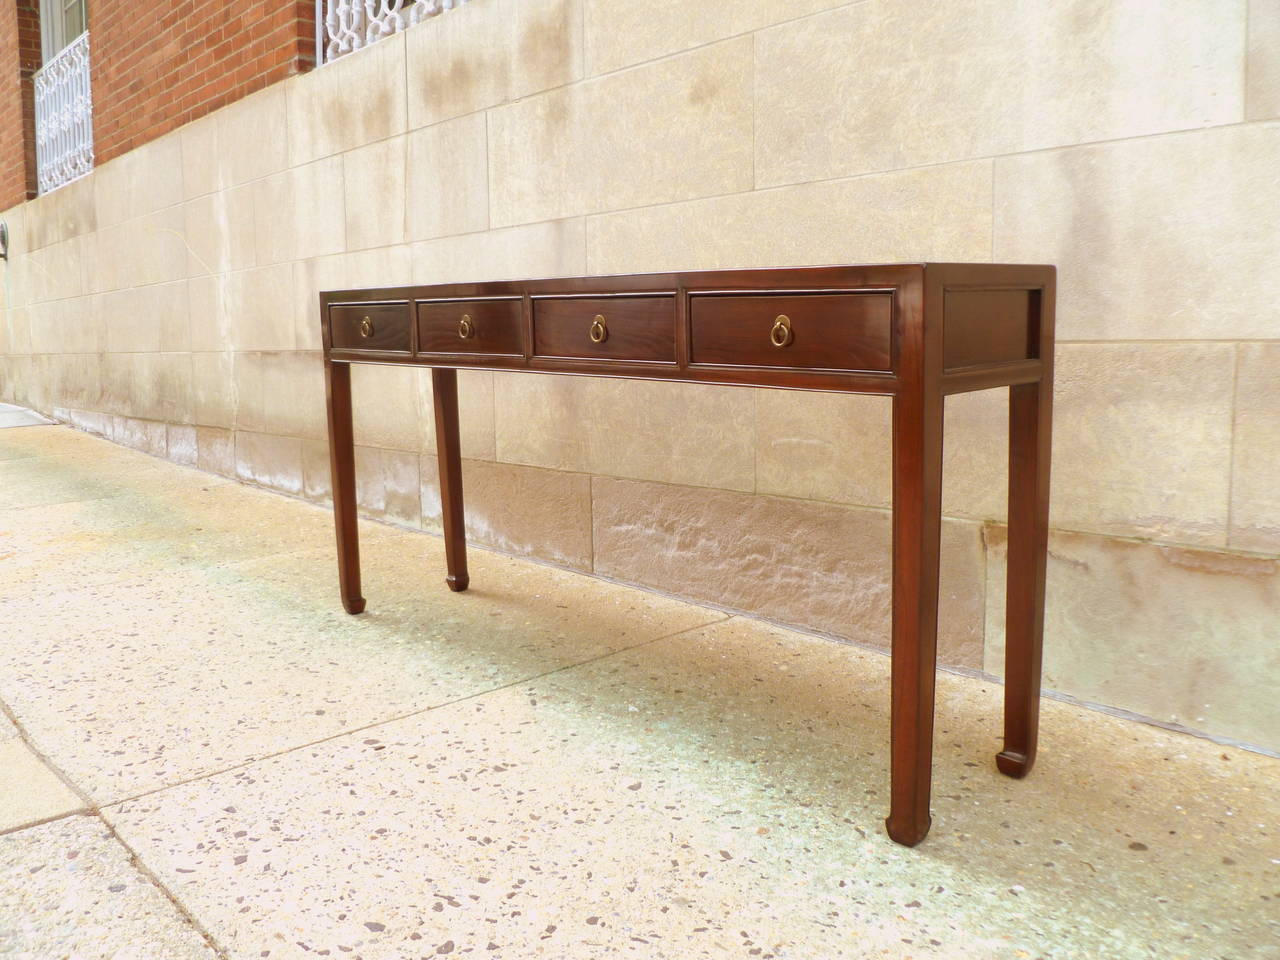 Early 20th Century Fine Ju Mu Wood Console Table with Four Drawers